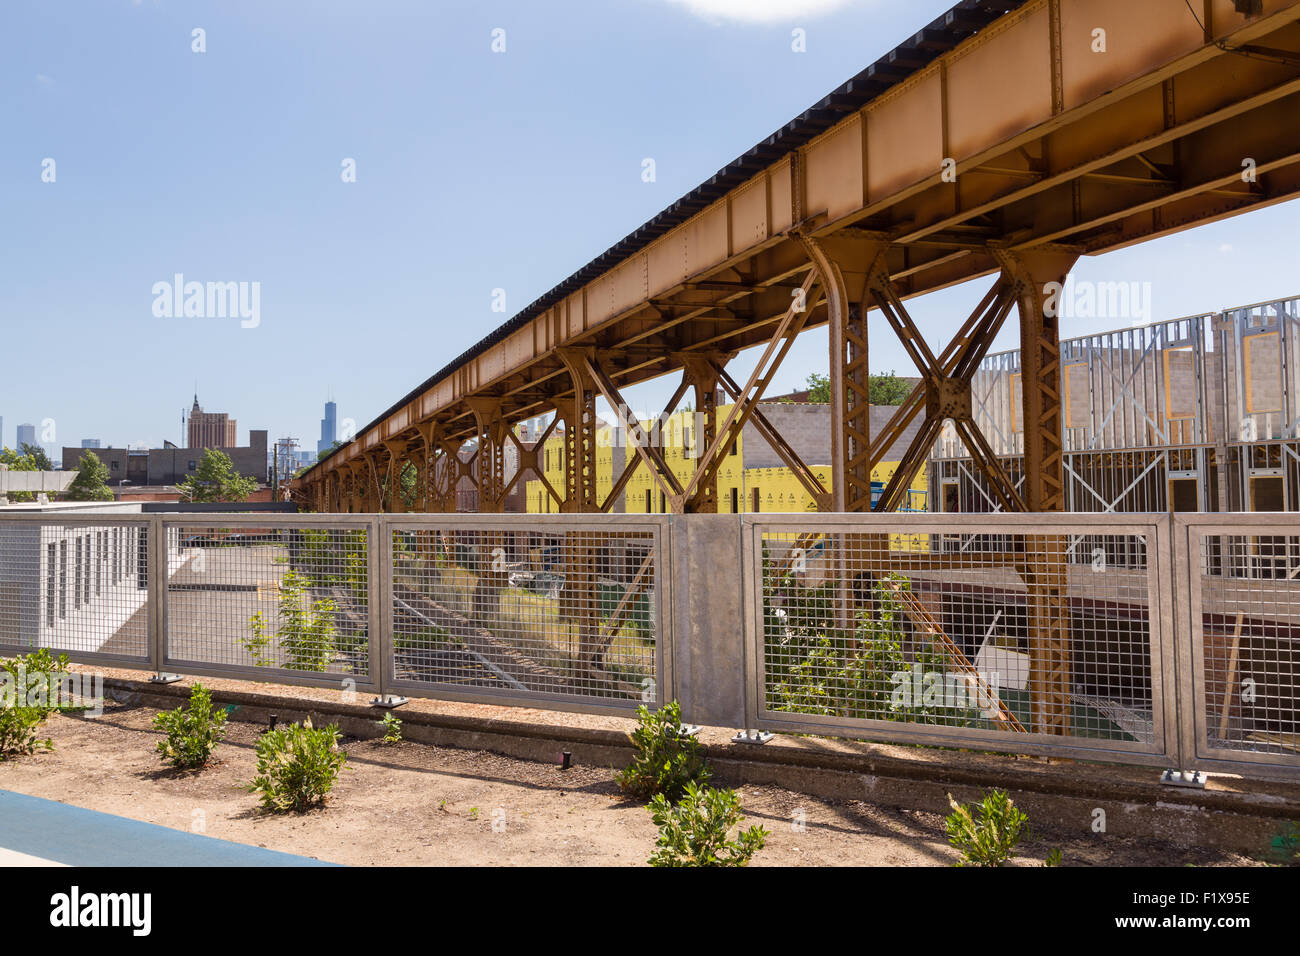 The Blue Line overpass at Milwaukee Avenue along the 606 elevated bike trail, green space and park built on the old Bloomingdale Line in the Wicker Park neighborhood in Chicago, Illinois, USA Stock Photo